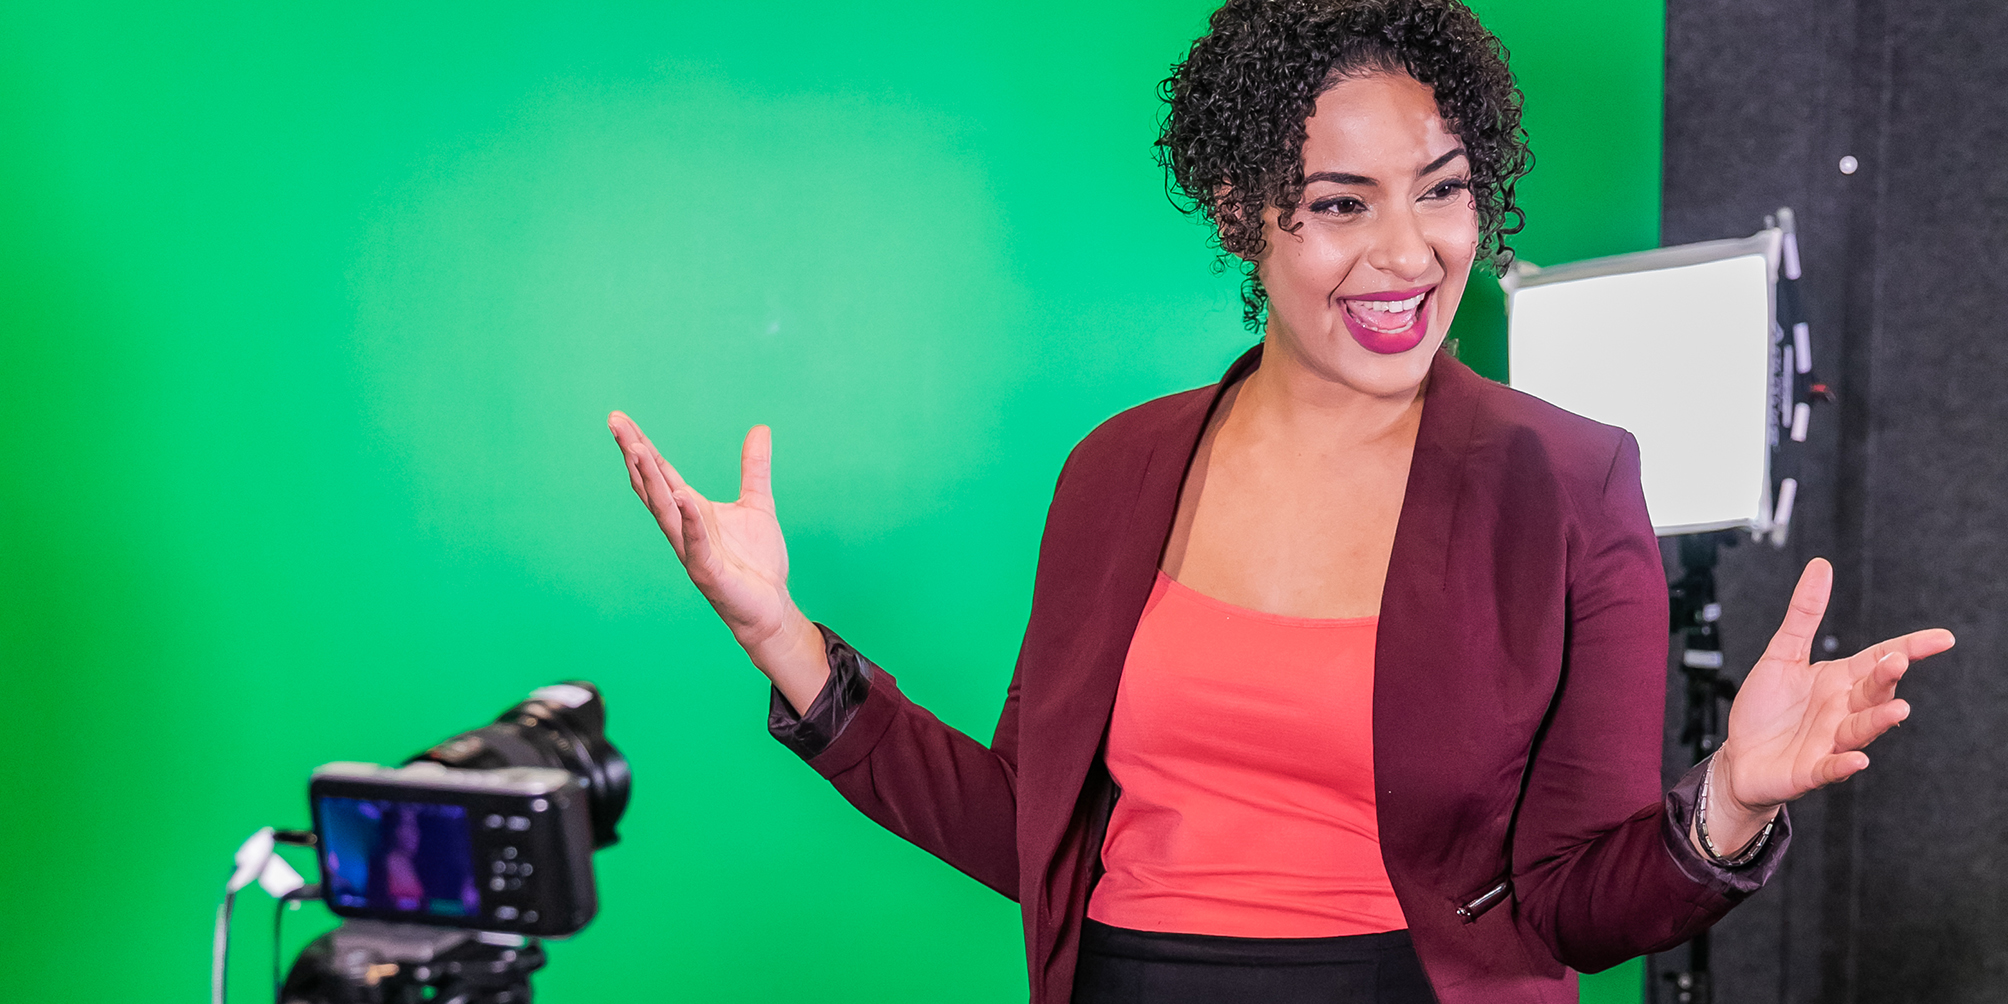 A woman wearing a suit stands inside a recording studio. She poses with her hands up in front of a green screen, microphone and video camera.